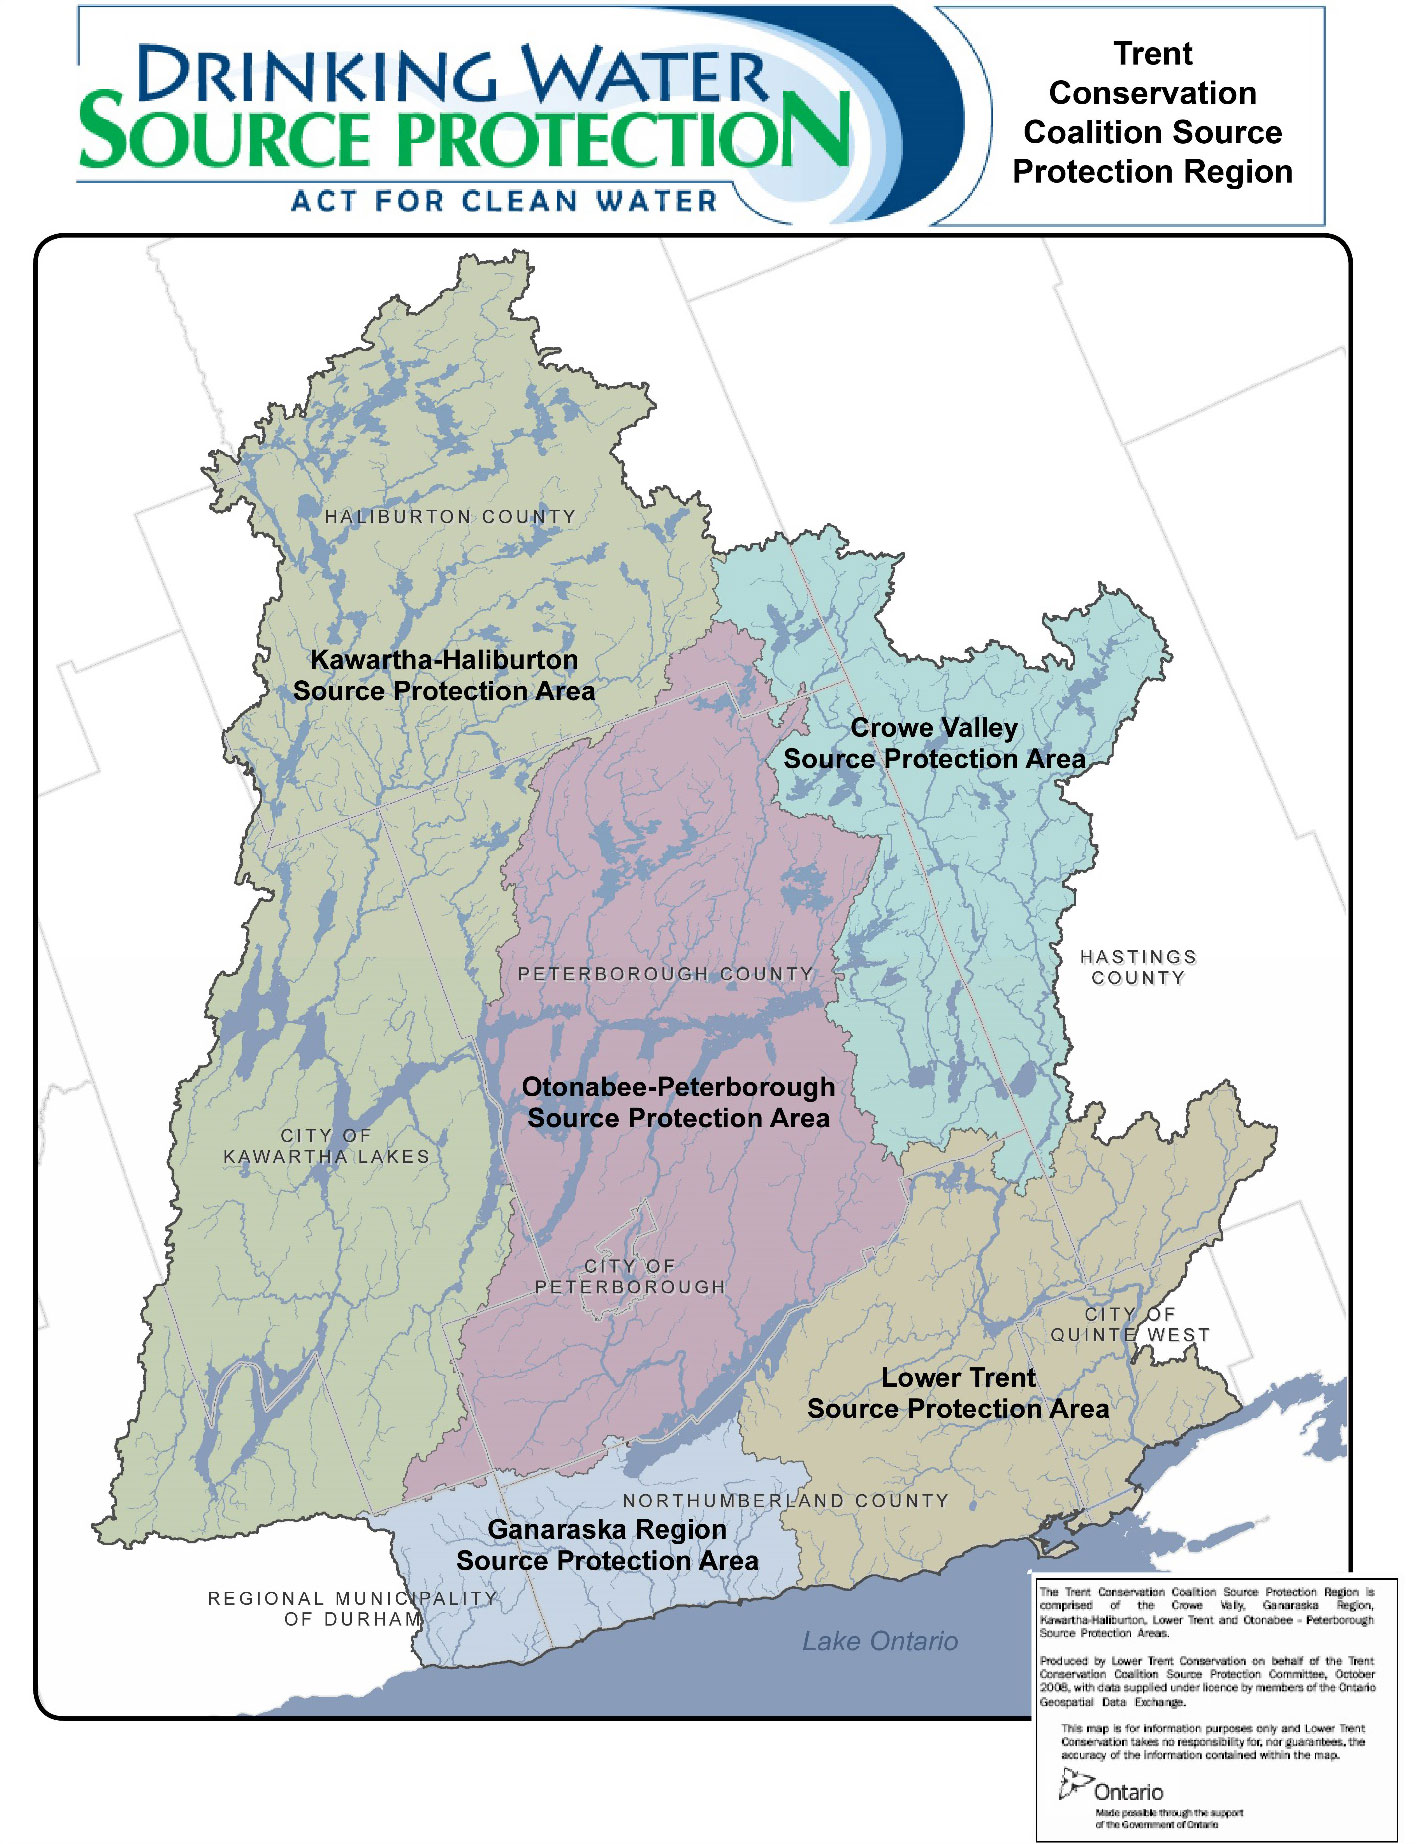 Trent Conservation Coalition Source Protection Region